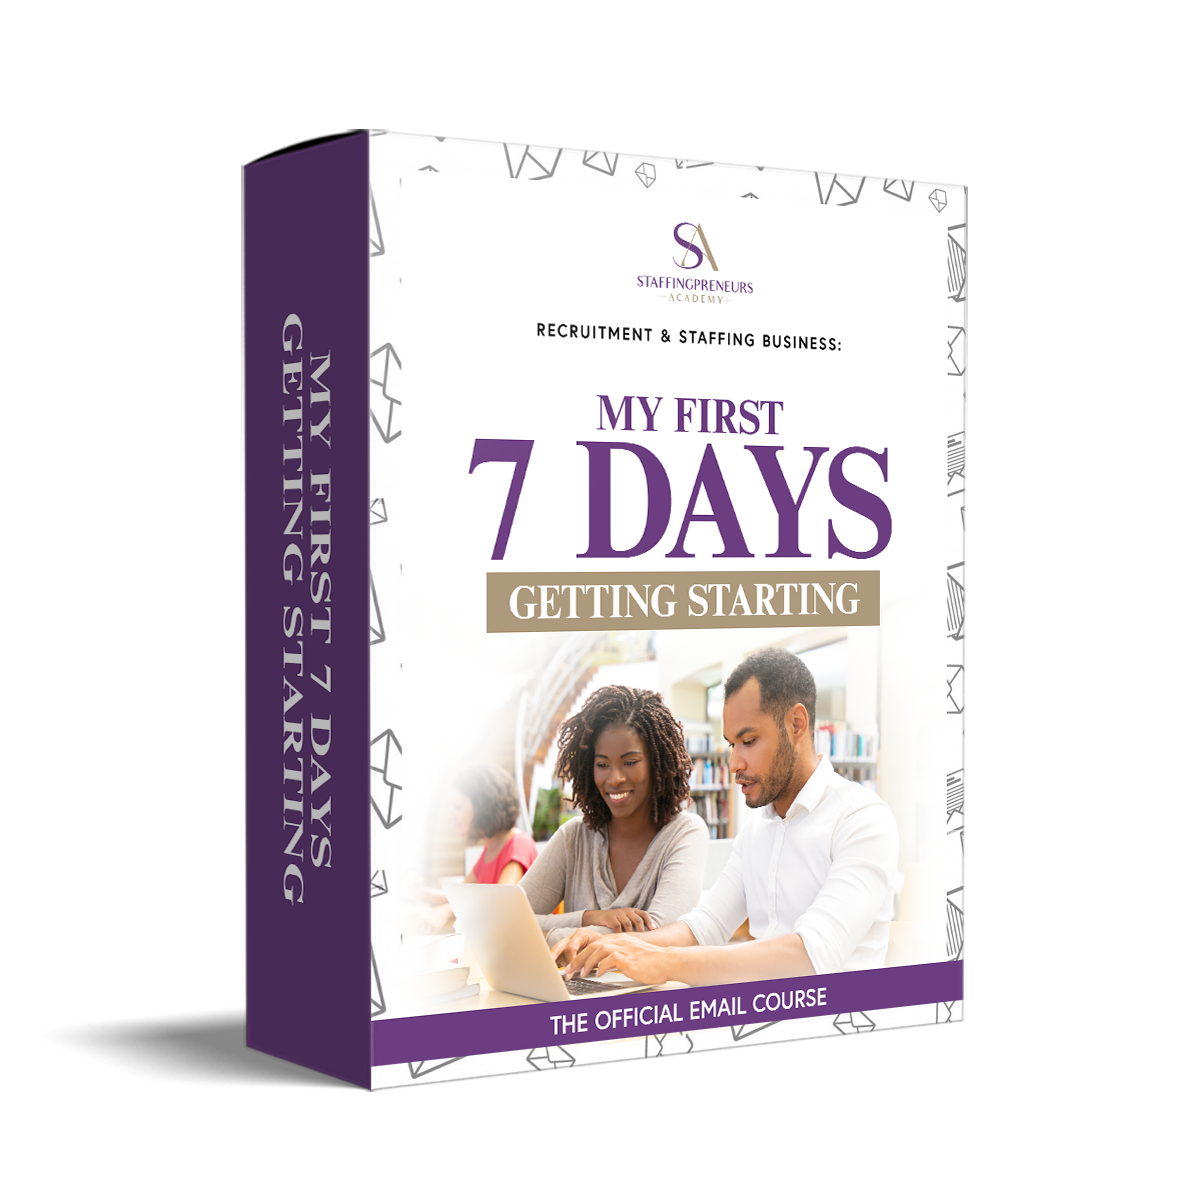 My First 7 Days Getting Started With My Niche' recruitment & Staffing Business email course